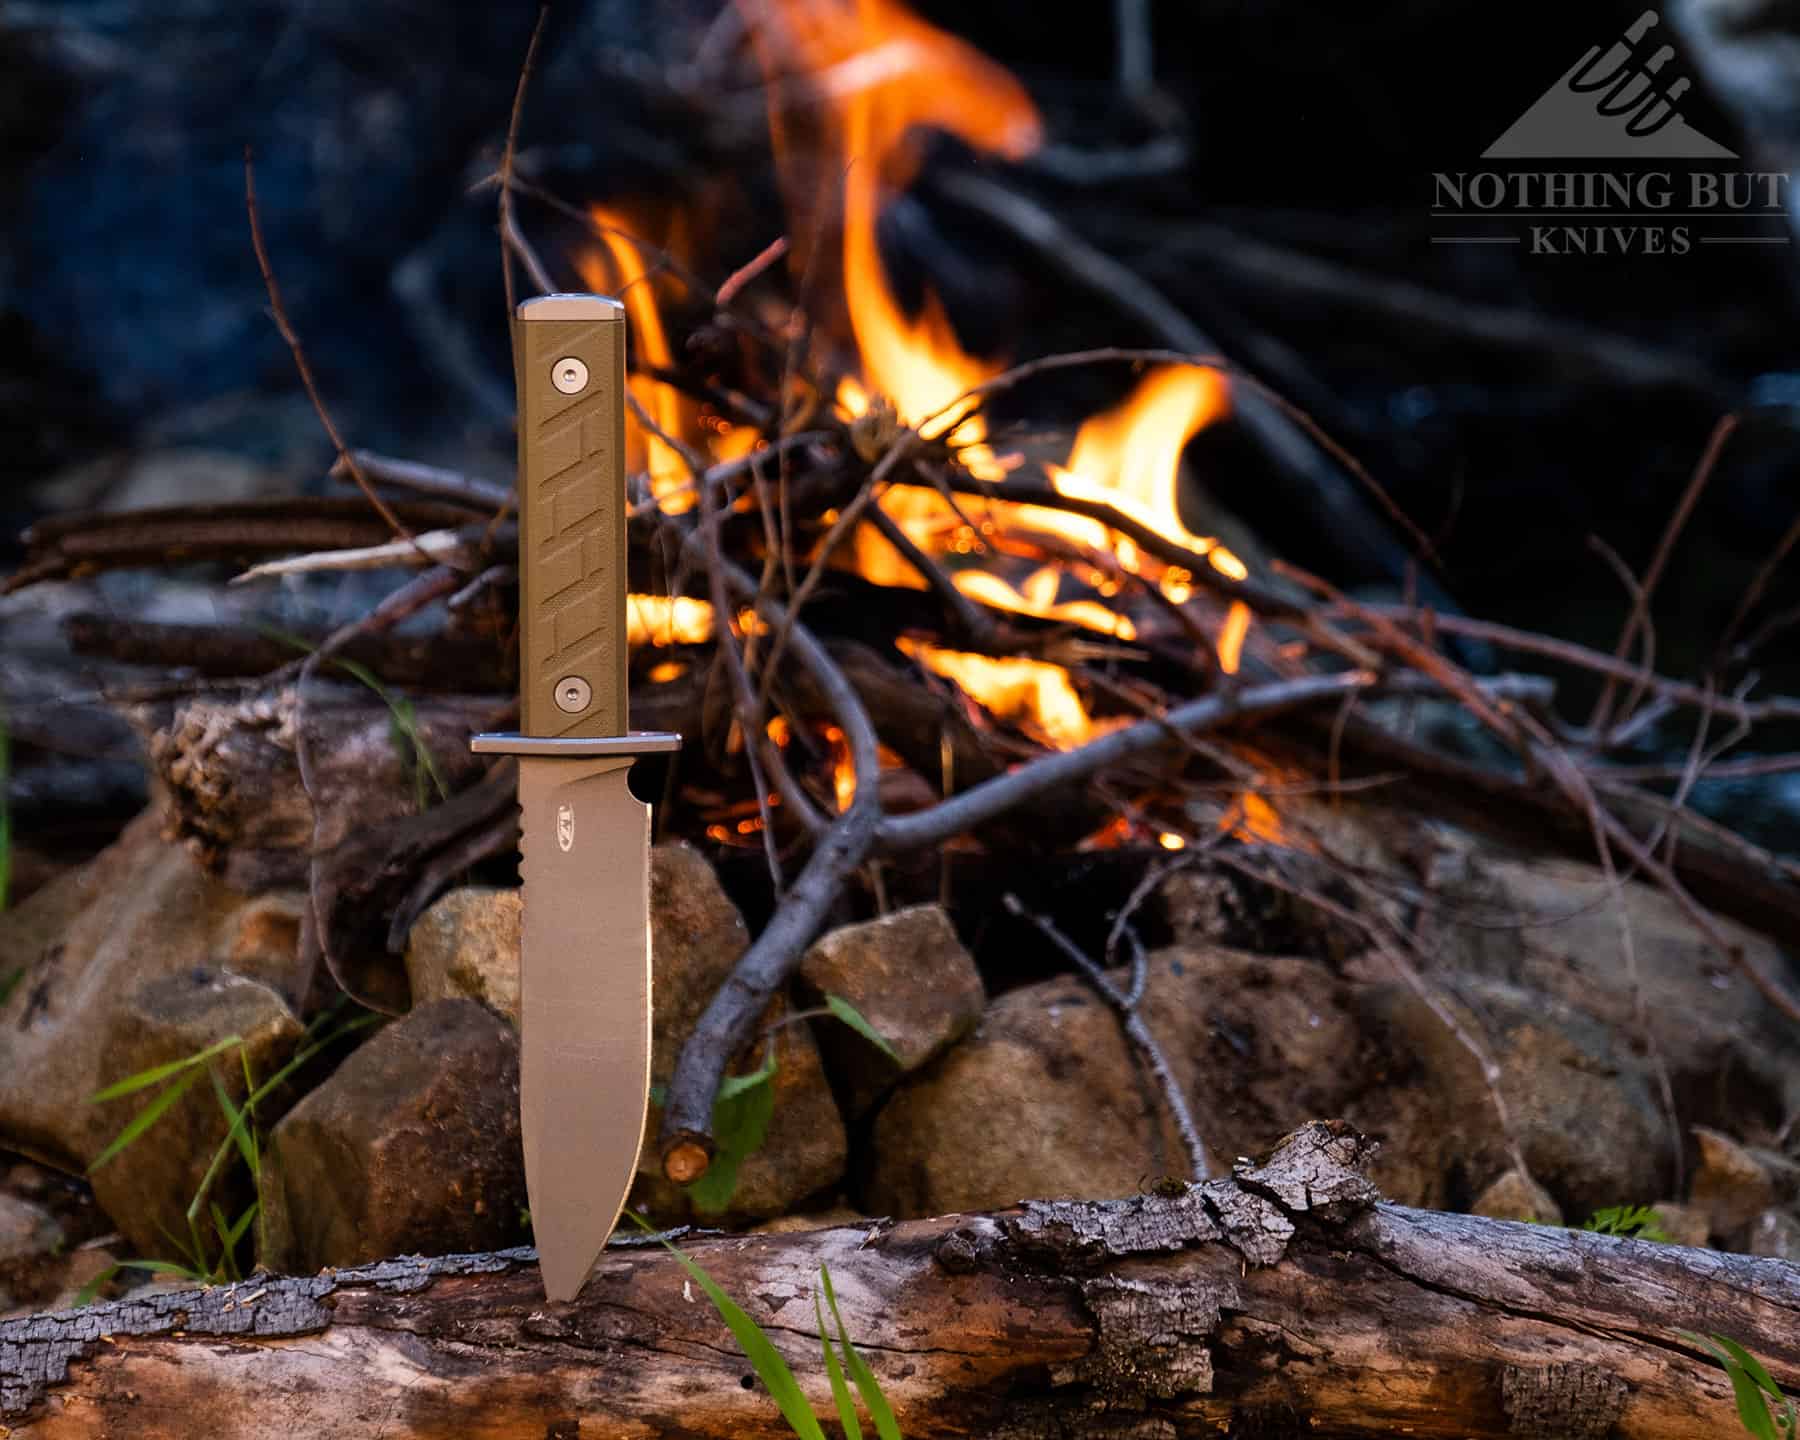 The Zero Tolerance 0006 is based on a bayonet design, but it makes a great camping knife. 